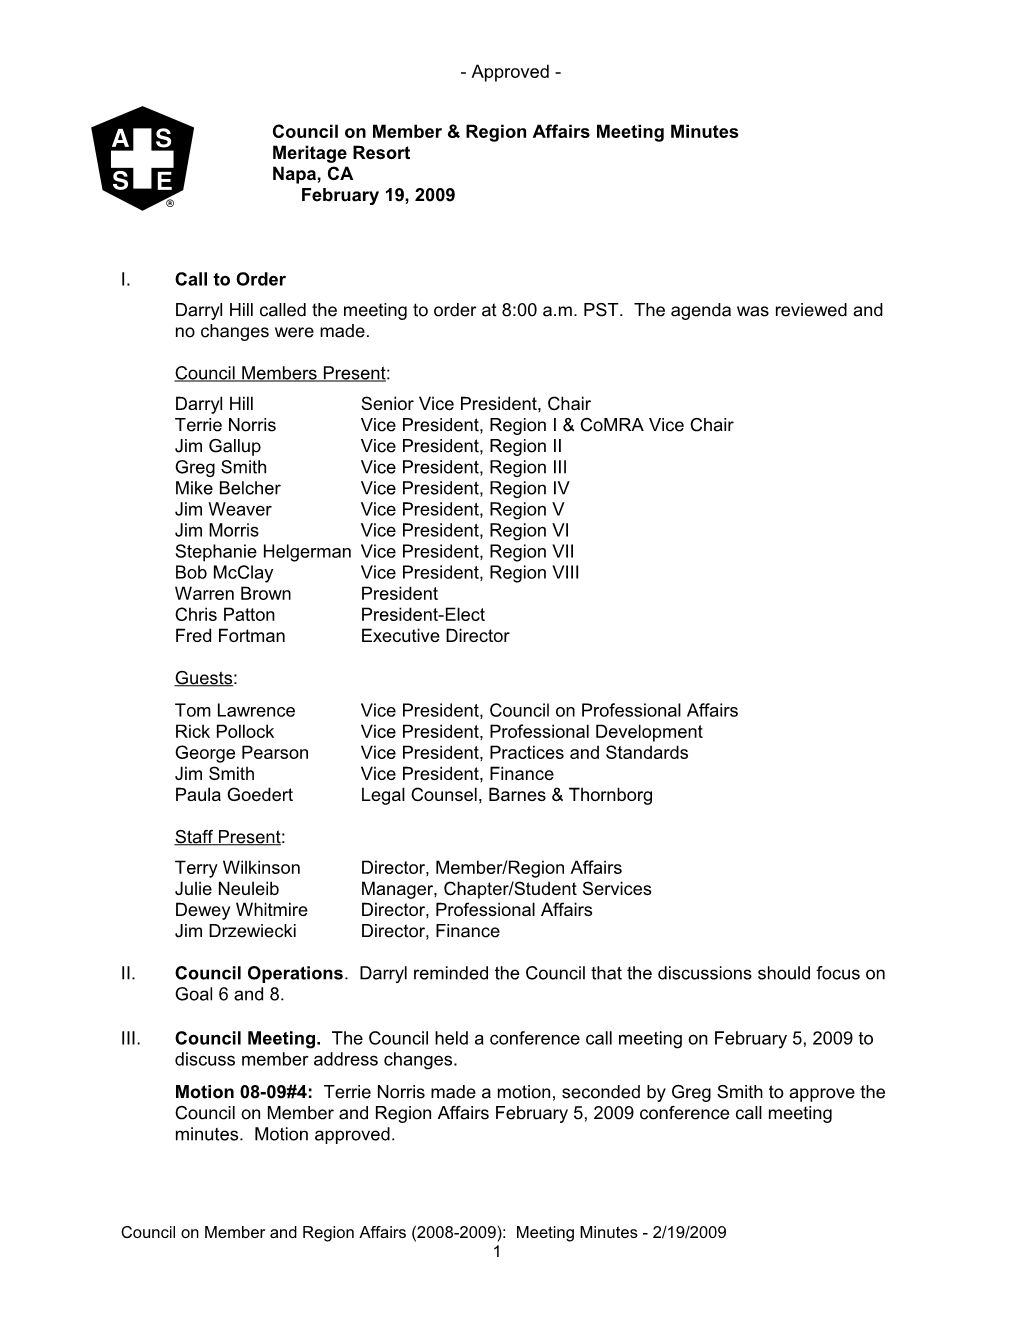 Council on Member & Region Affairs Meeting Minutes